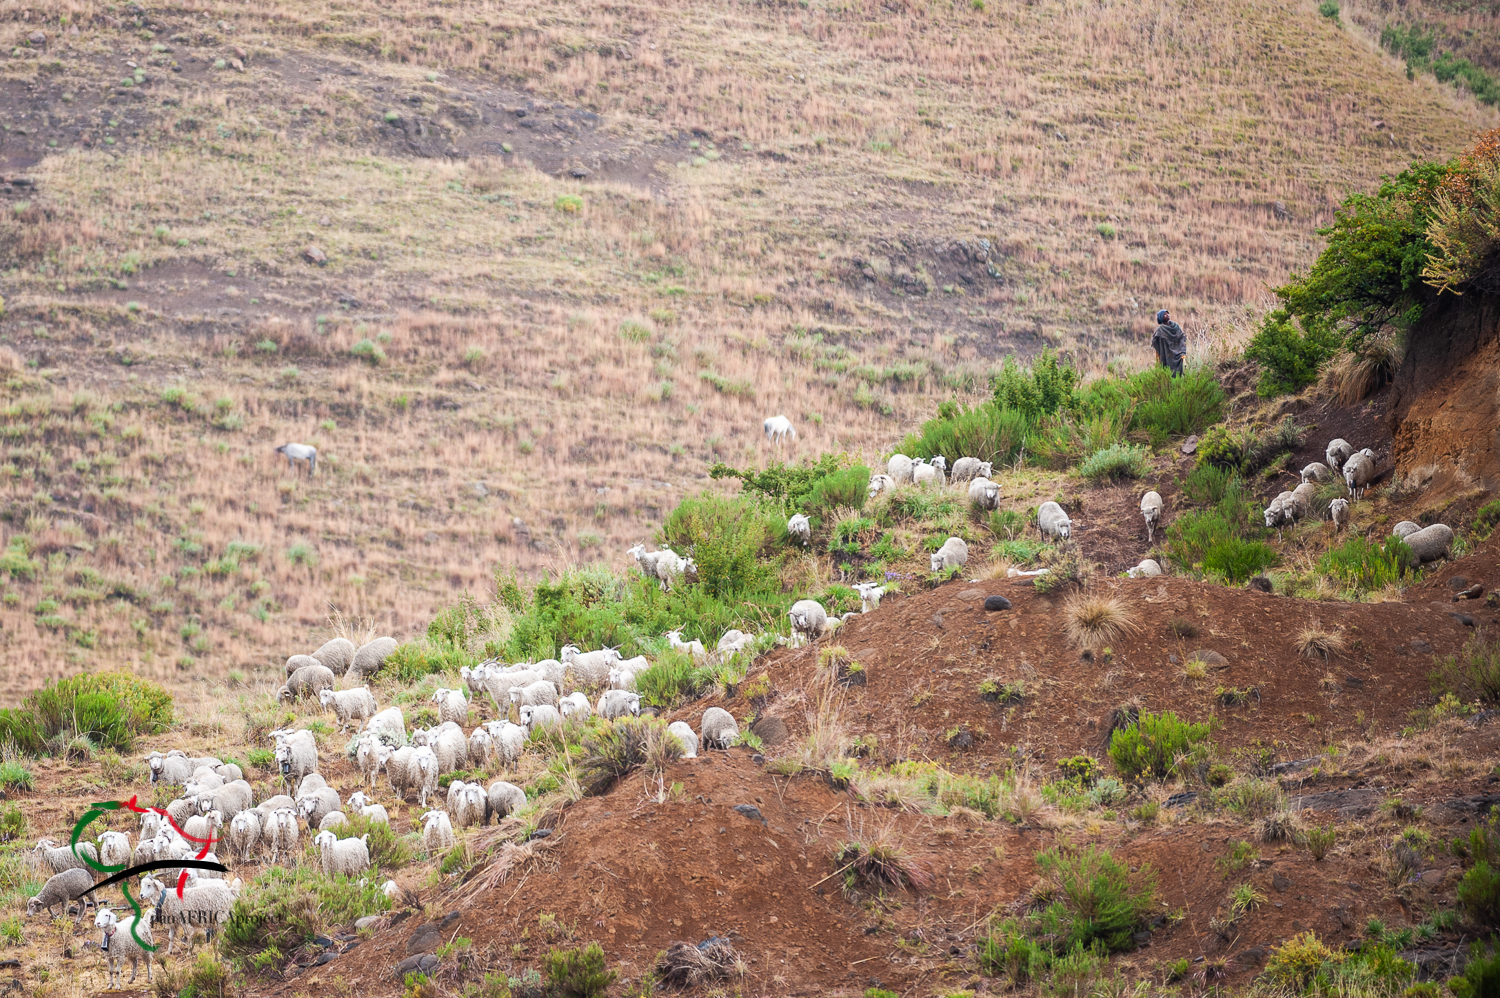 Man herding sheep in the valley